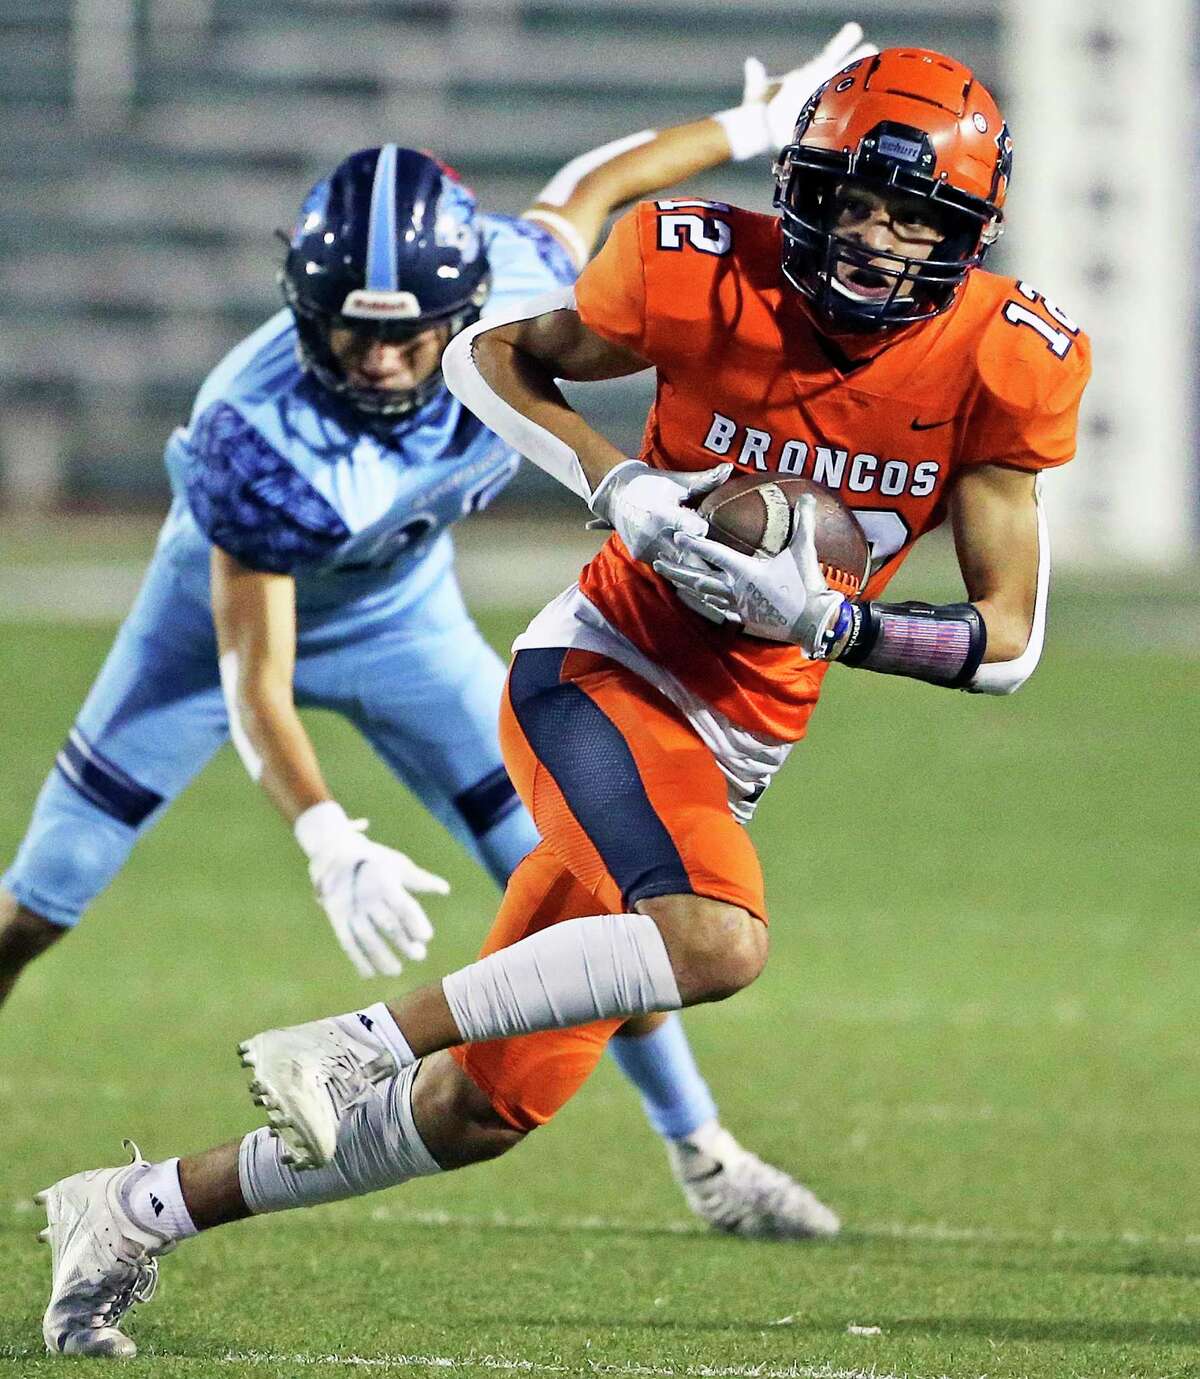 Bronco receiver Josh Suarez slips under a defender and makes it to the sideline after a catch as Brandeis hosts Johnson at Farris Stadium on Oct.22, 2020.